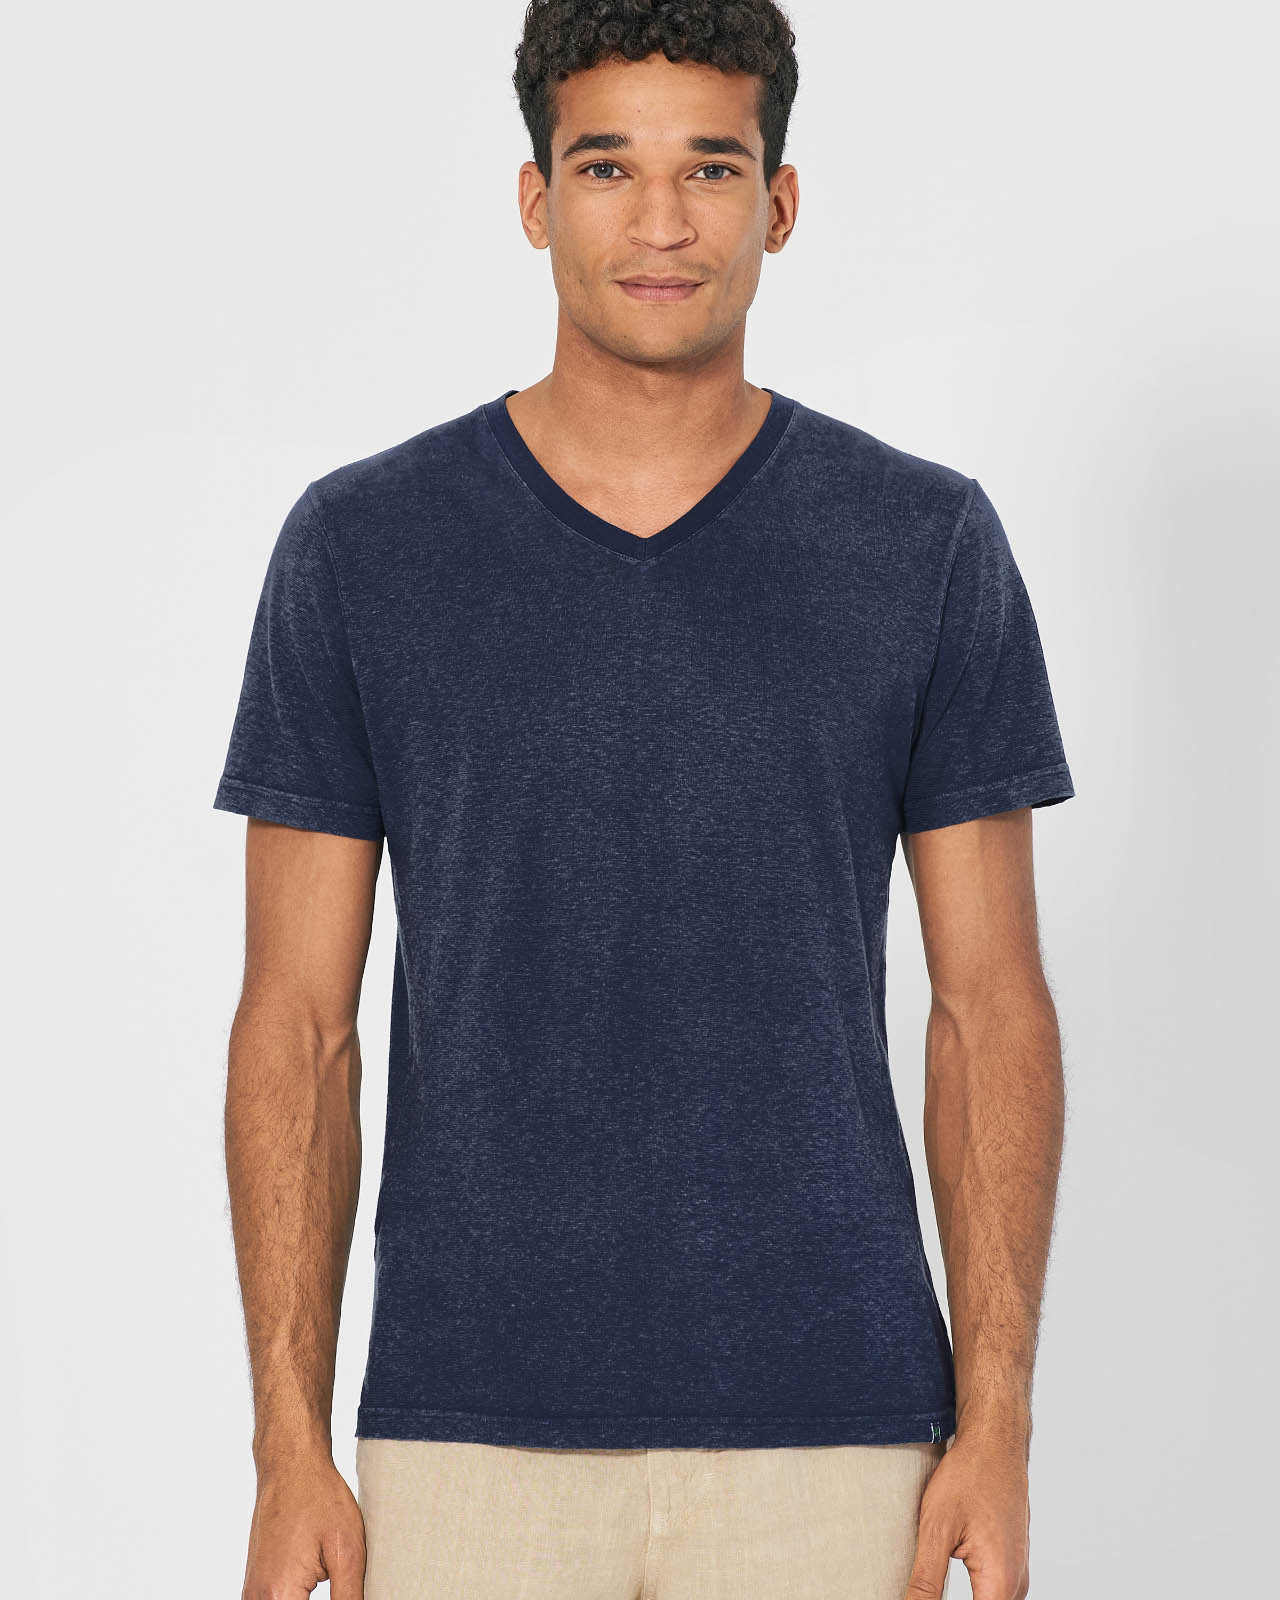 t-shirt chanvre homme DH842_navy